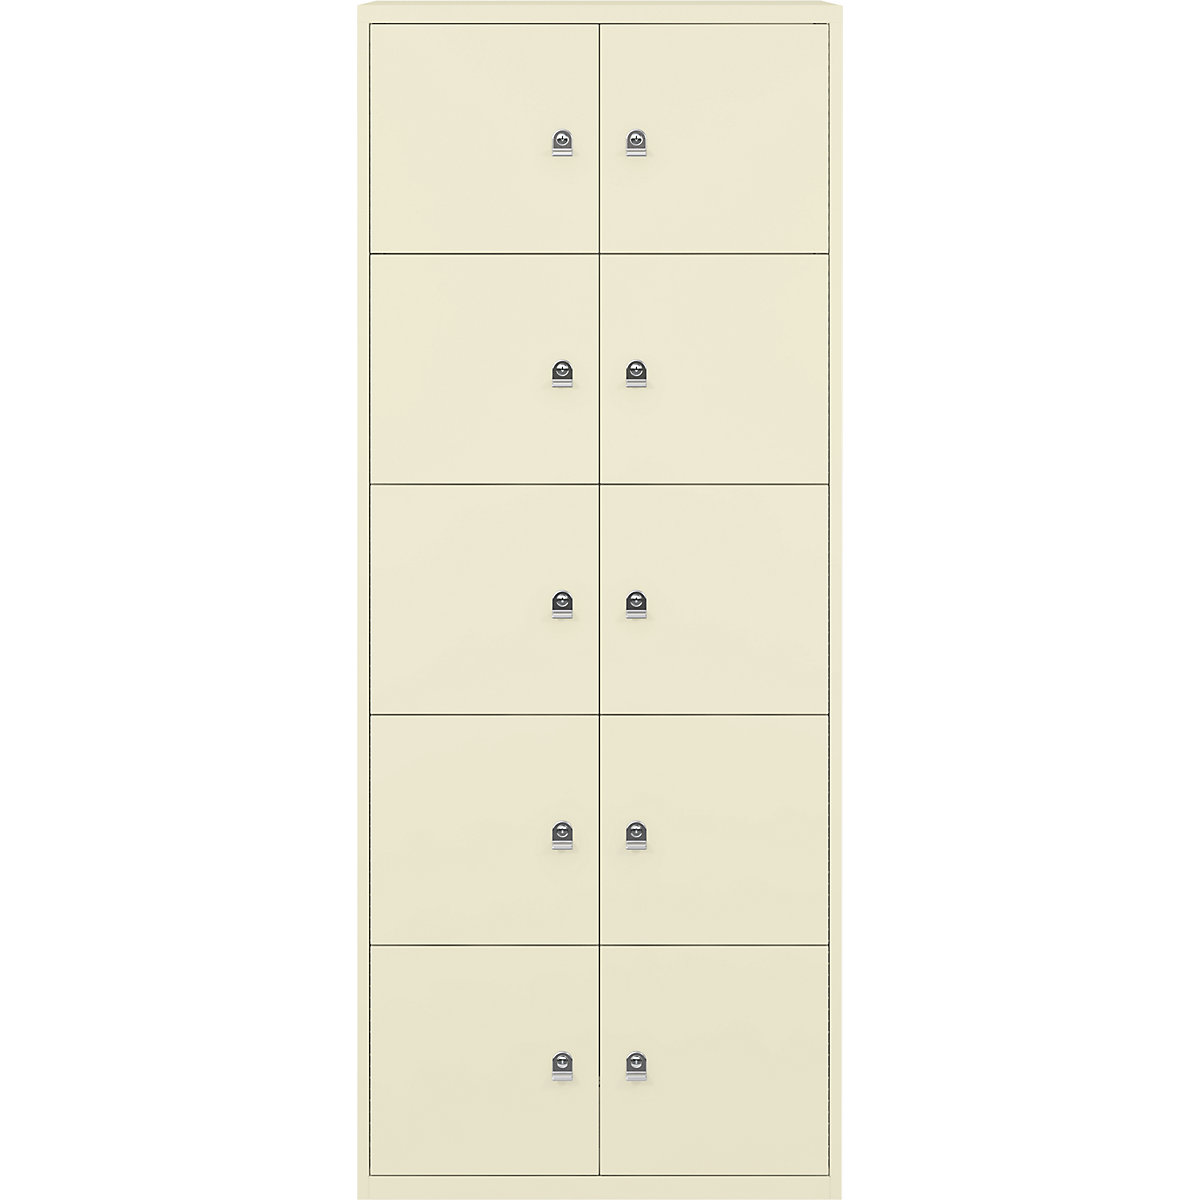 BISLEY – LateralFile™ lodge, with 10 lockable compartments, height 375 mm each, light ivory